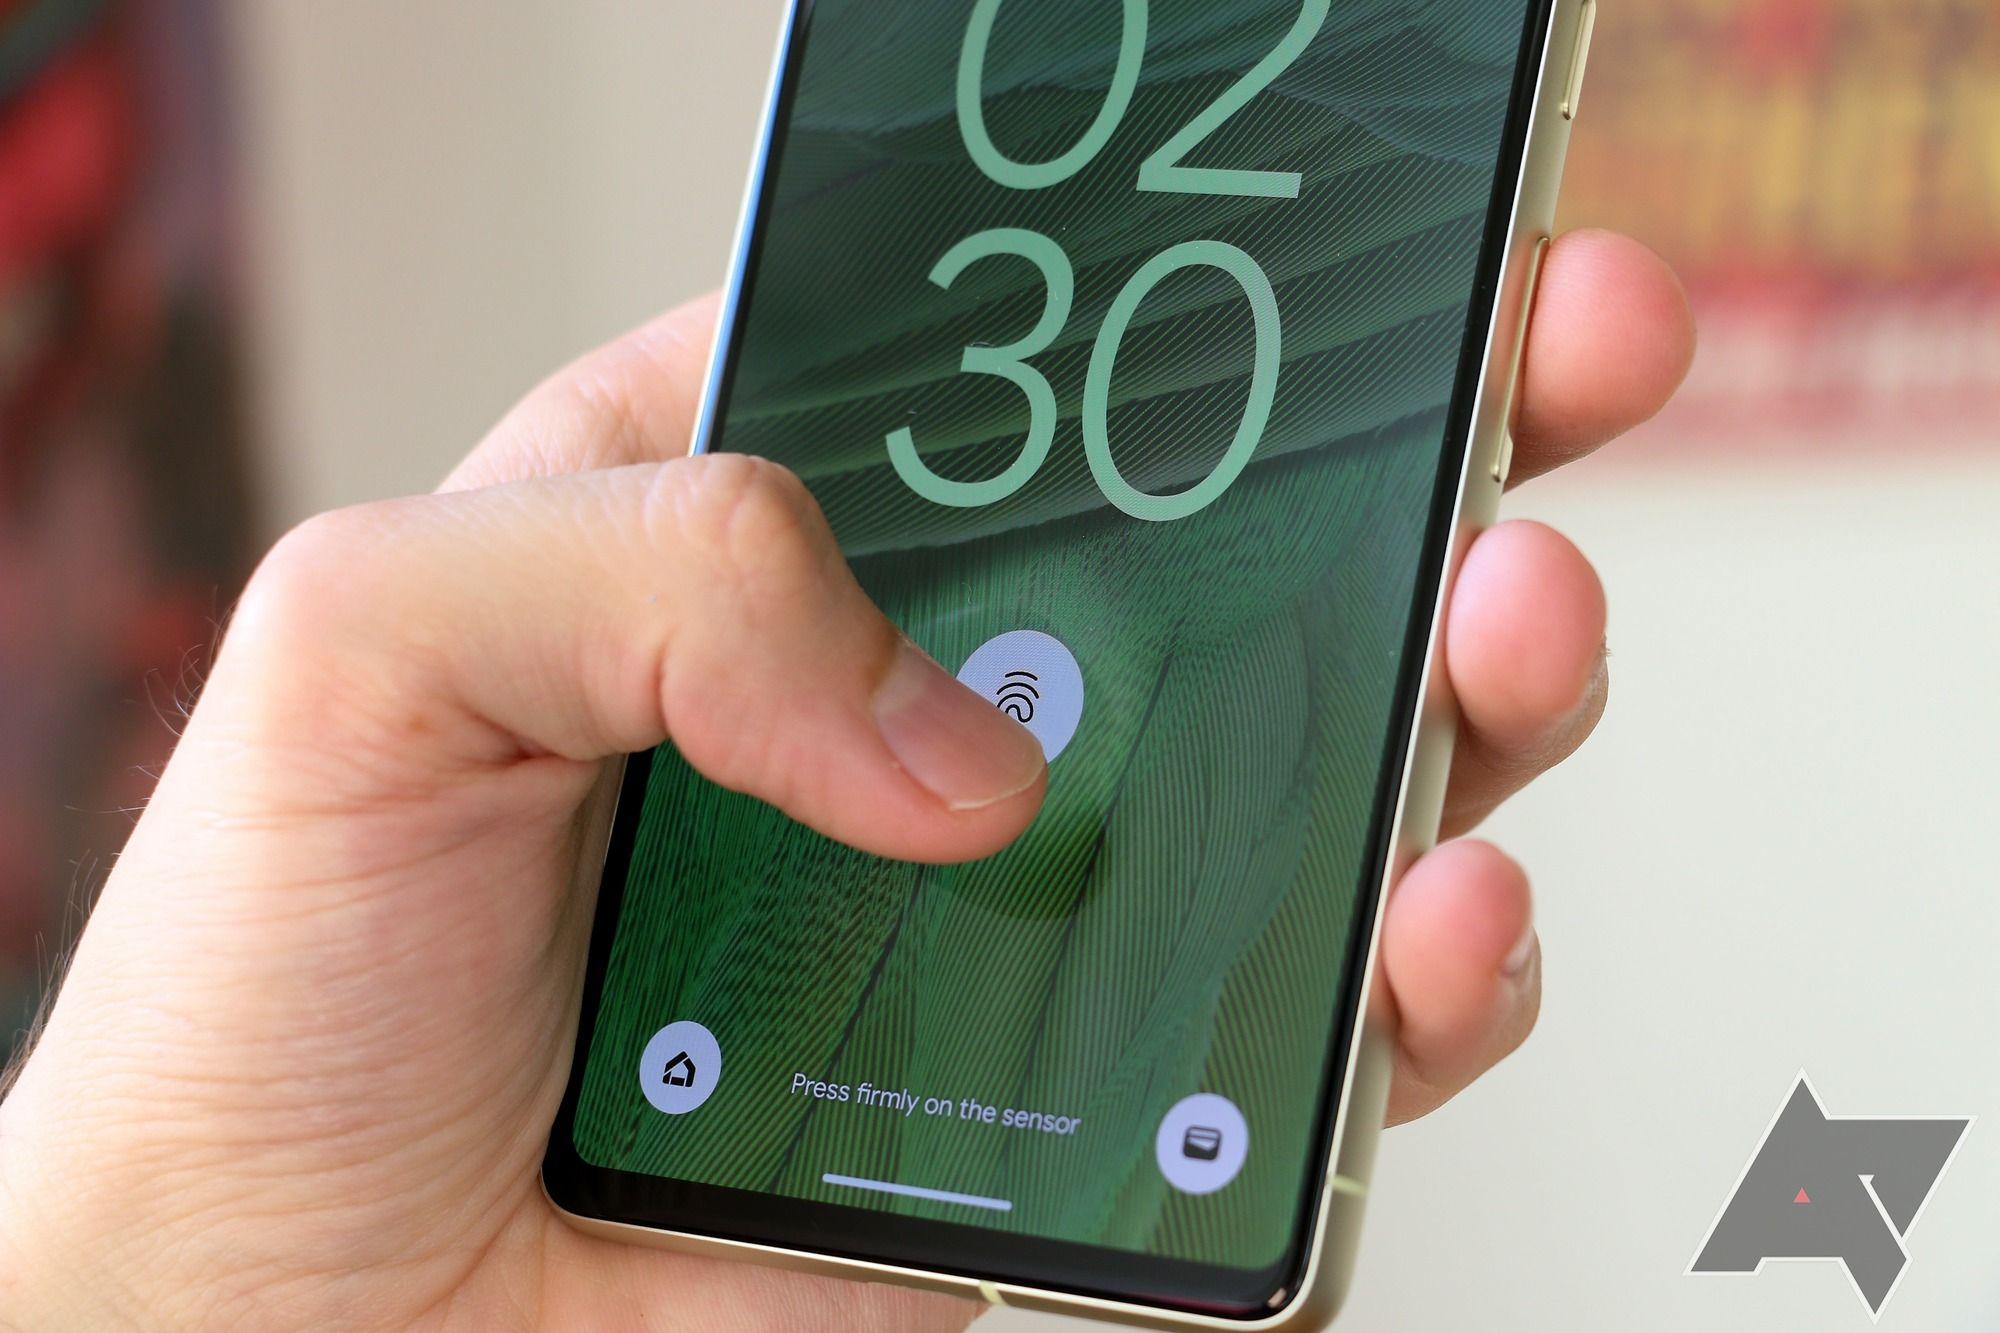 Do you prefer fingerprint scanners or face unlock on Android?